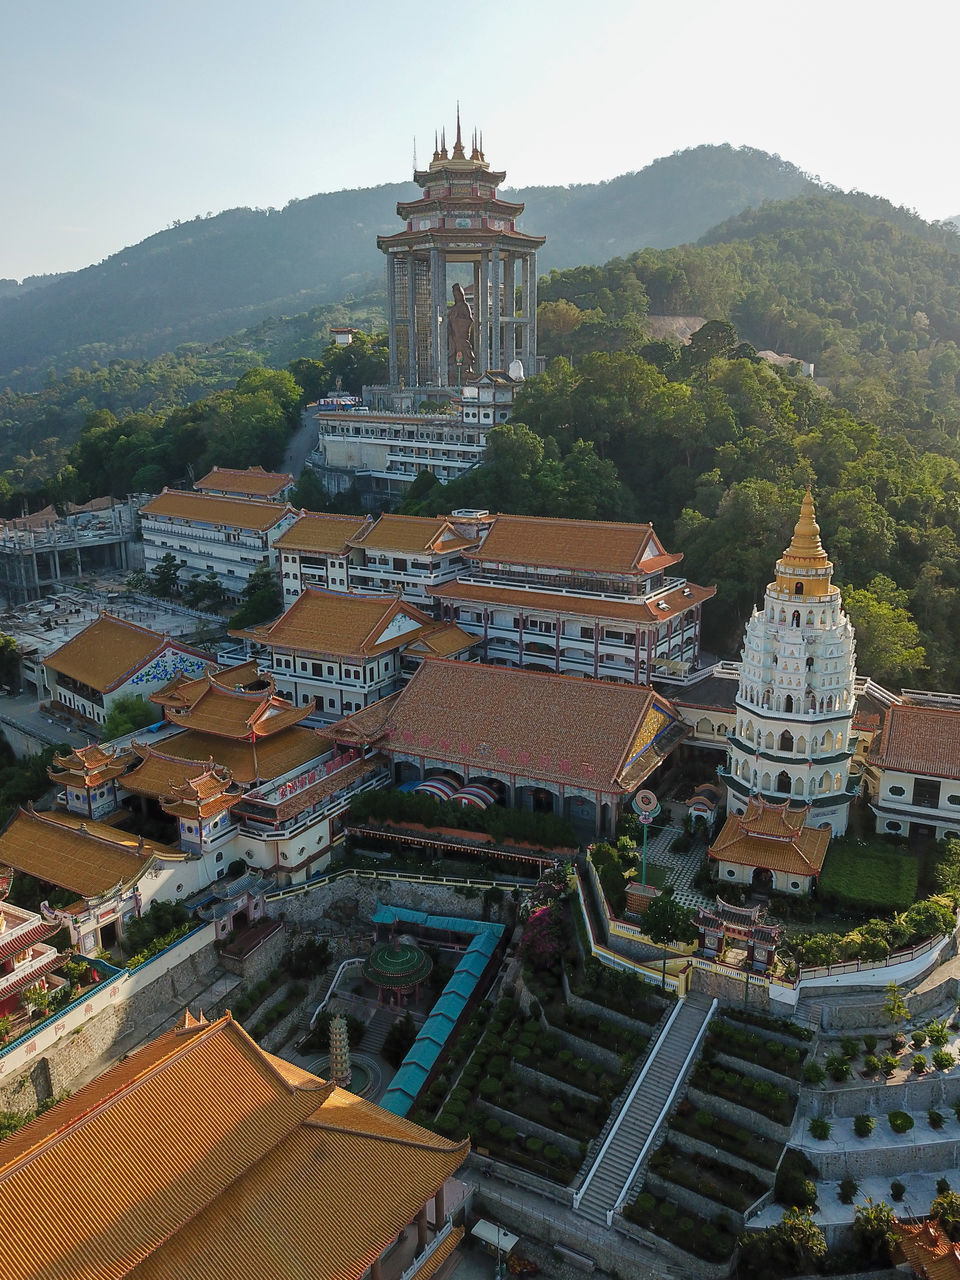 HIGH ANGLE VIEW OF TEMPLE BUILDING